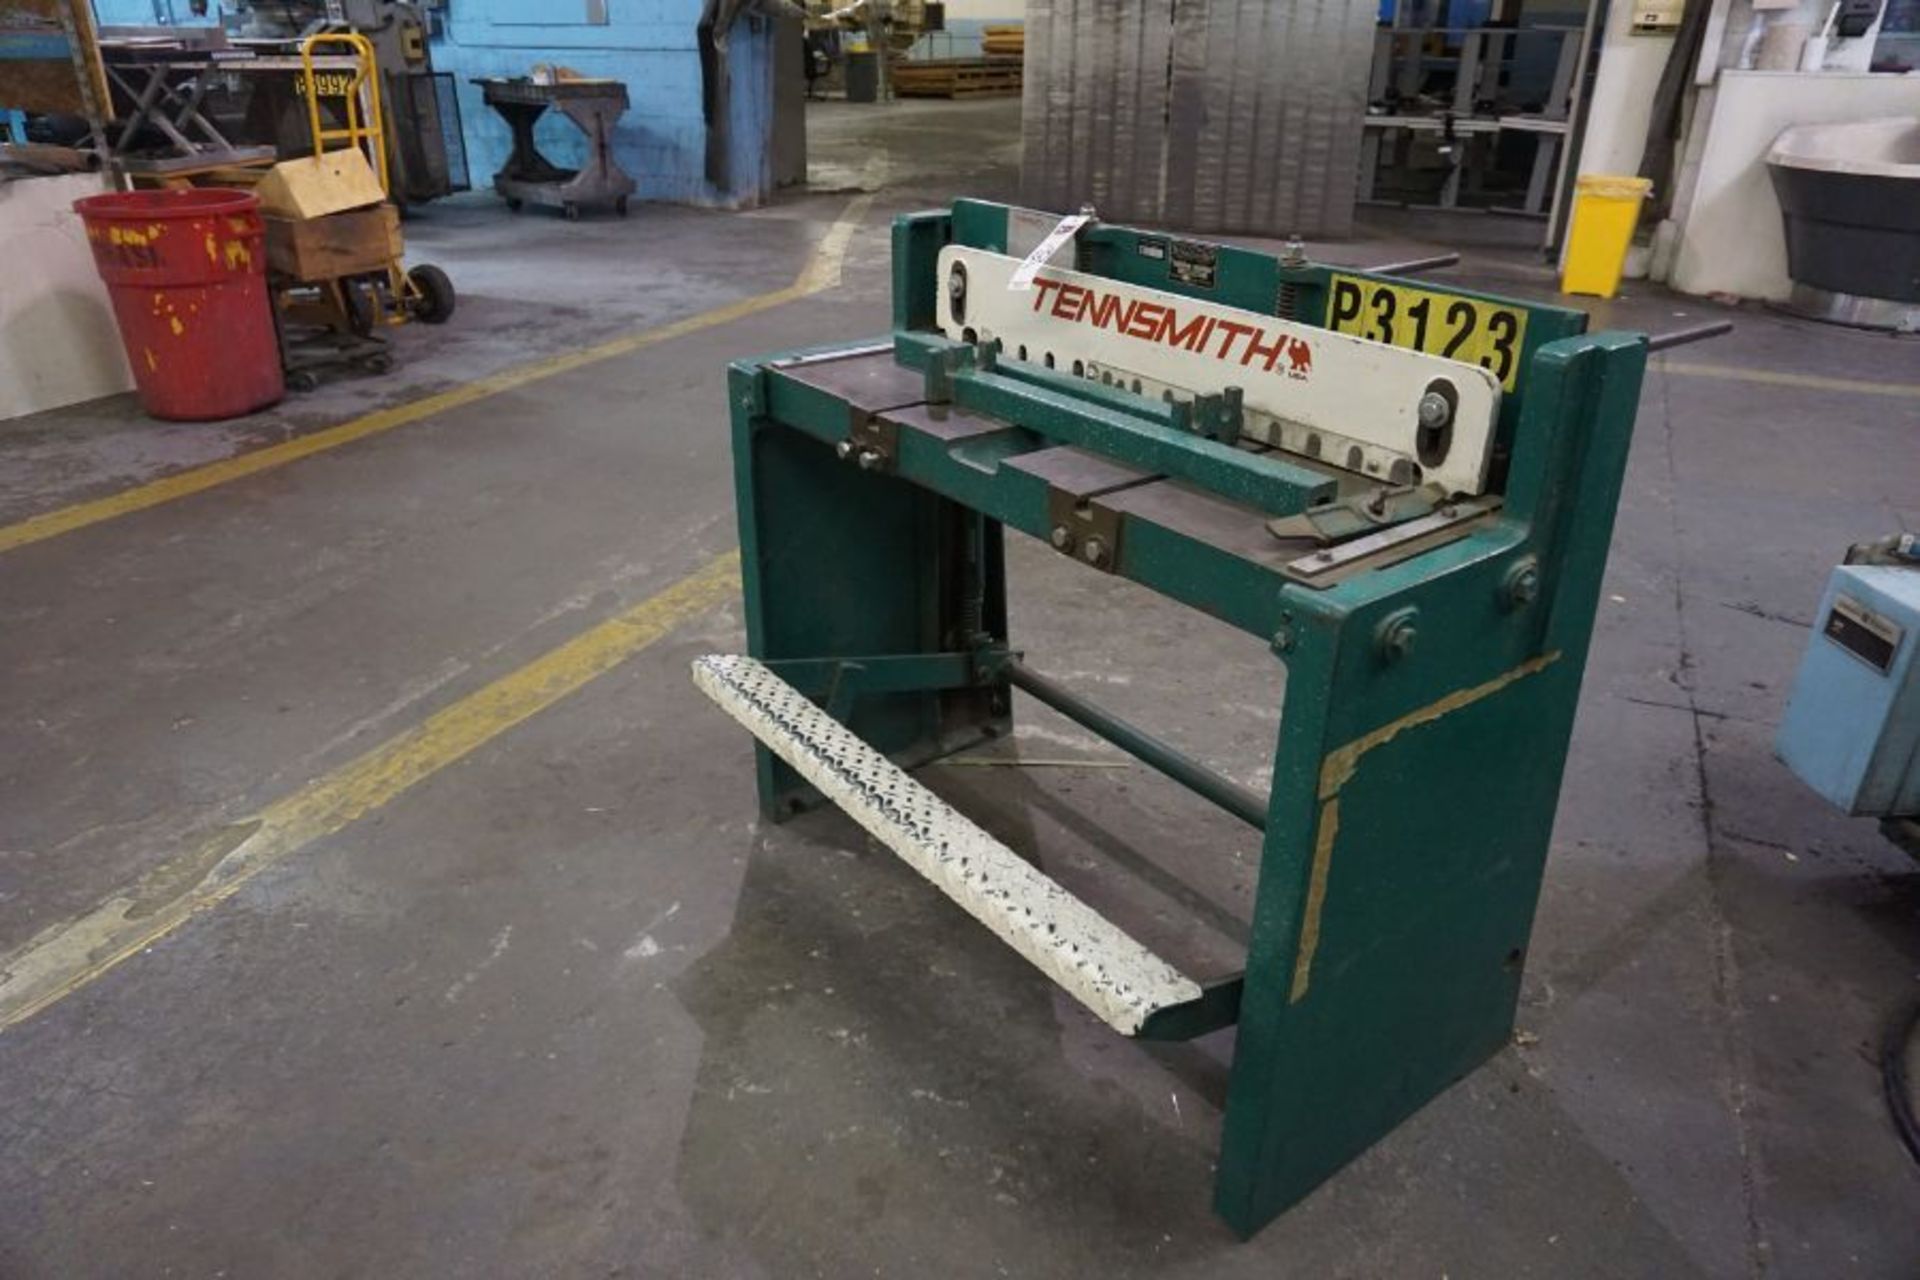 36" Tennsmith T3616 Foot Shear, s/n 17009 *Auctioned from Edgerton, KS* - Image 4 of 5